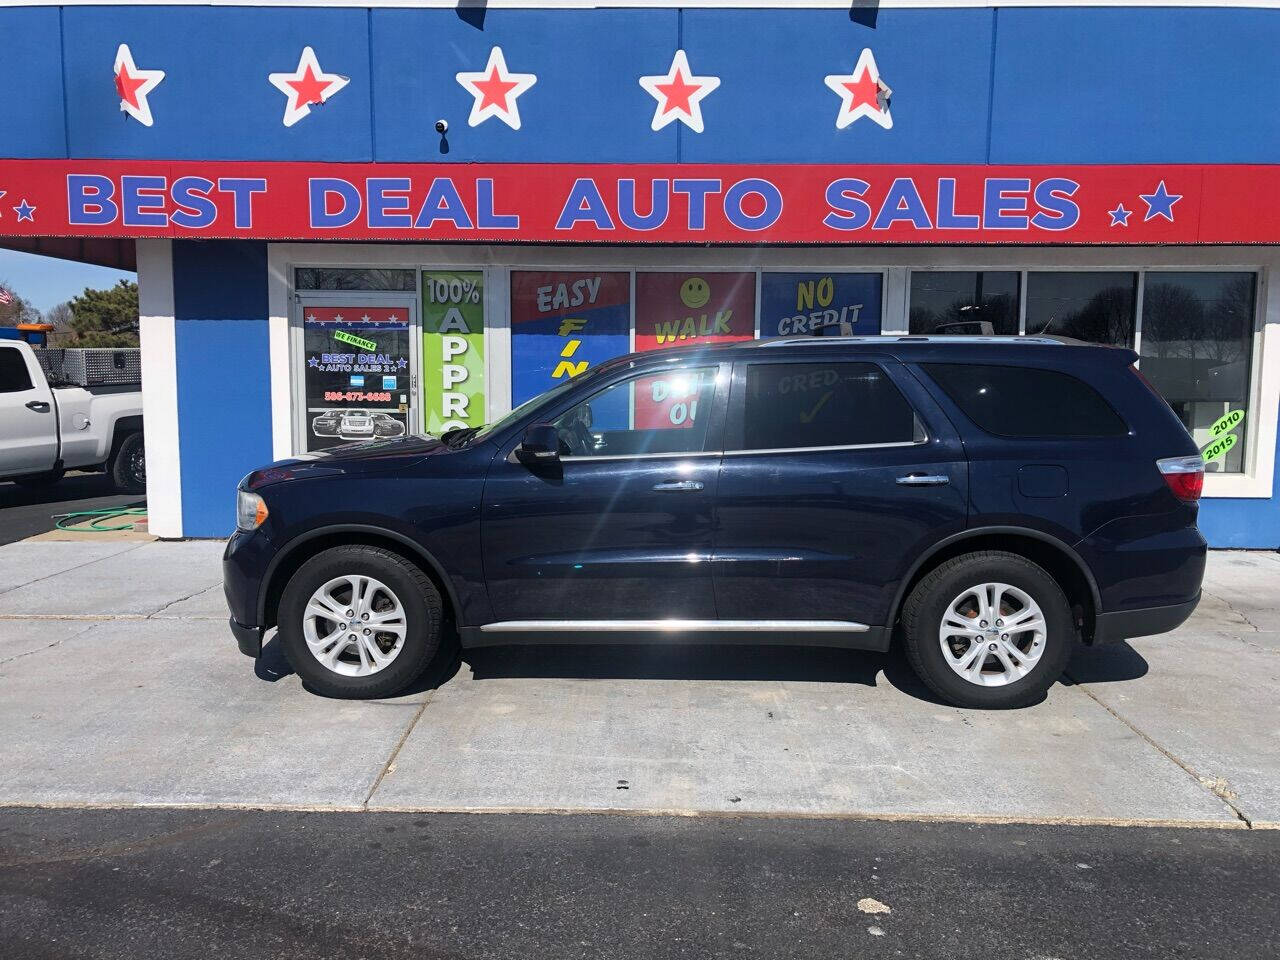 Apply for an Auto Loan at Best Deal Auto Sales, Detroit, MI, 313-427-3325